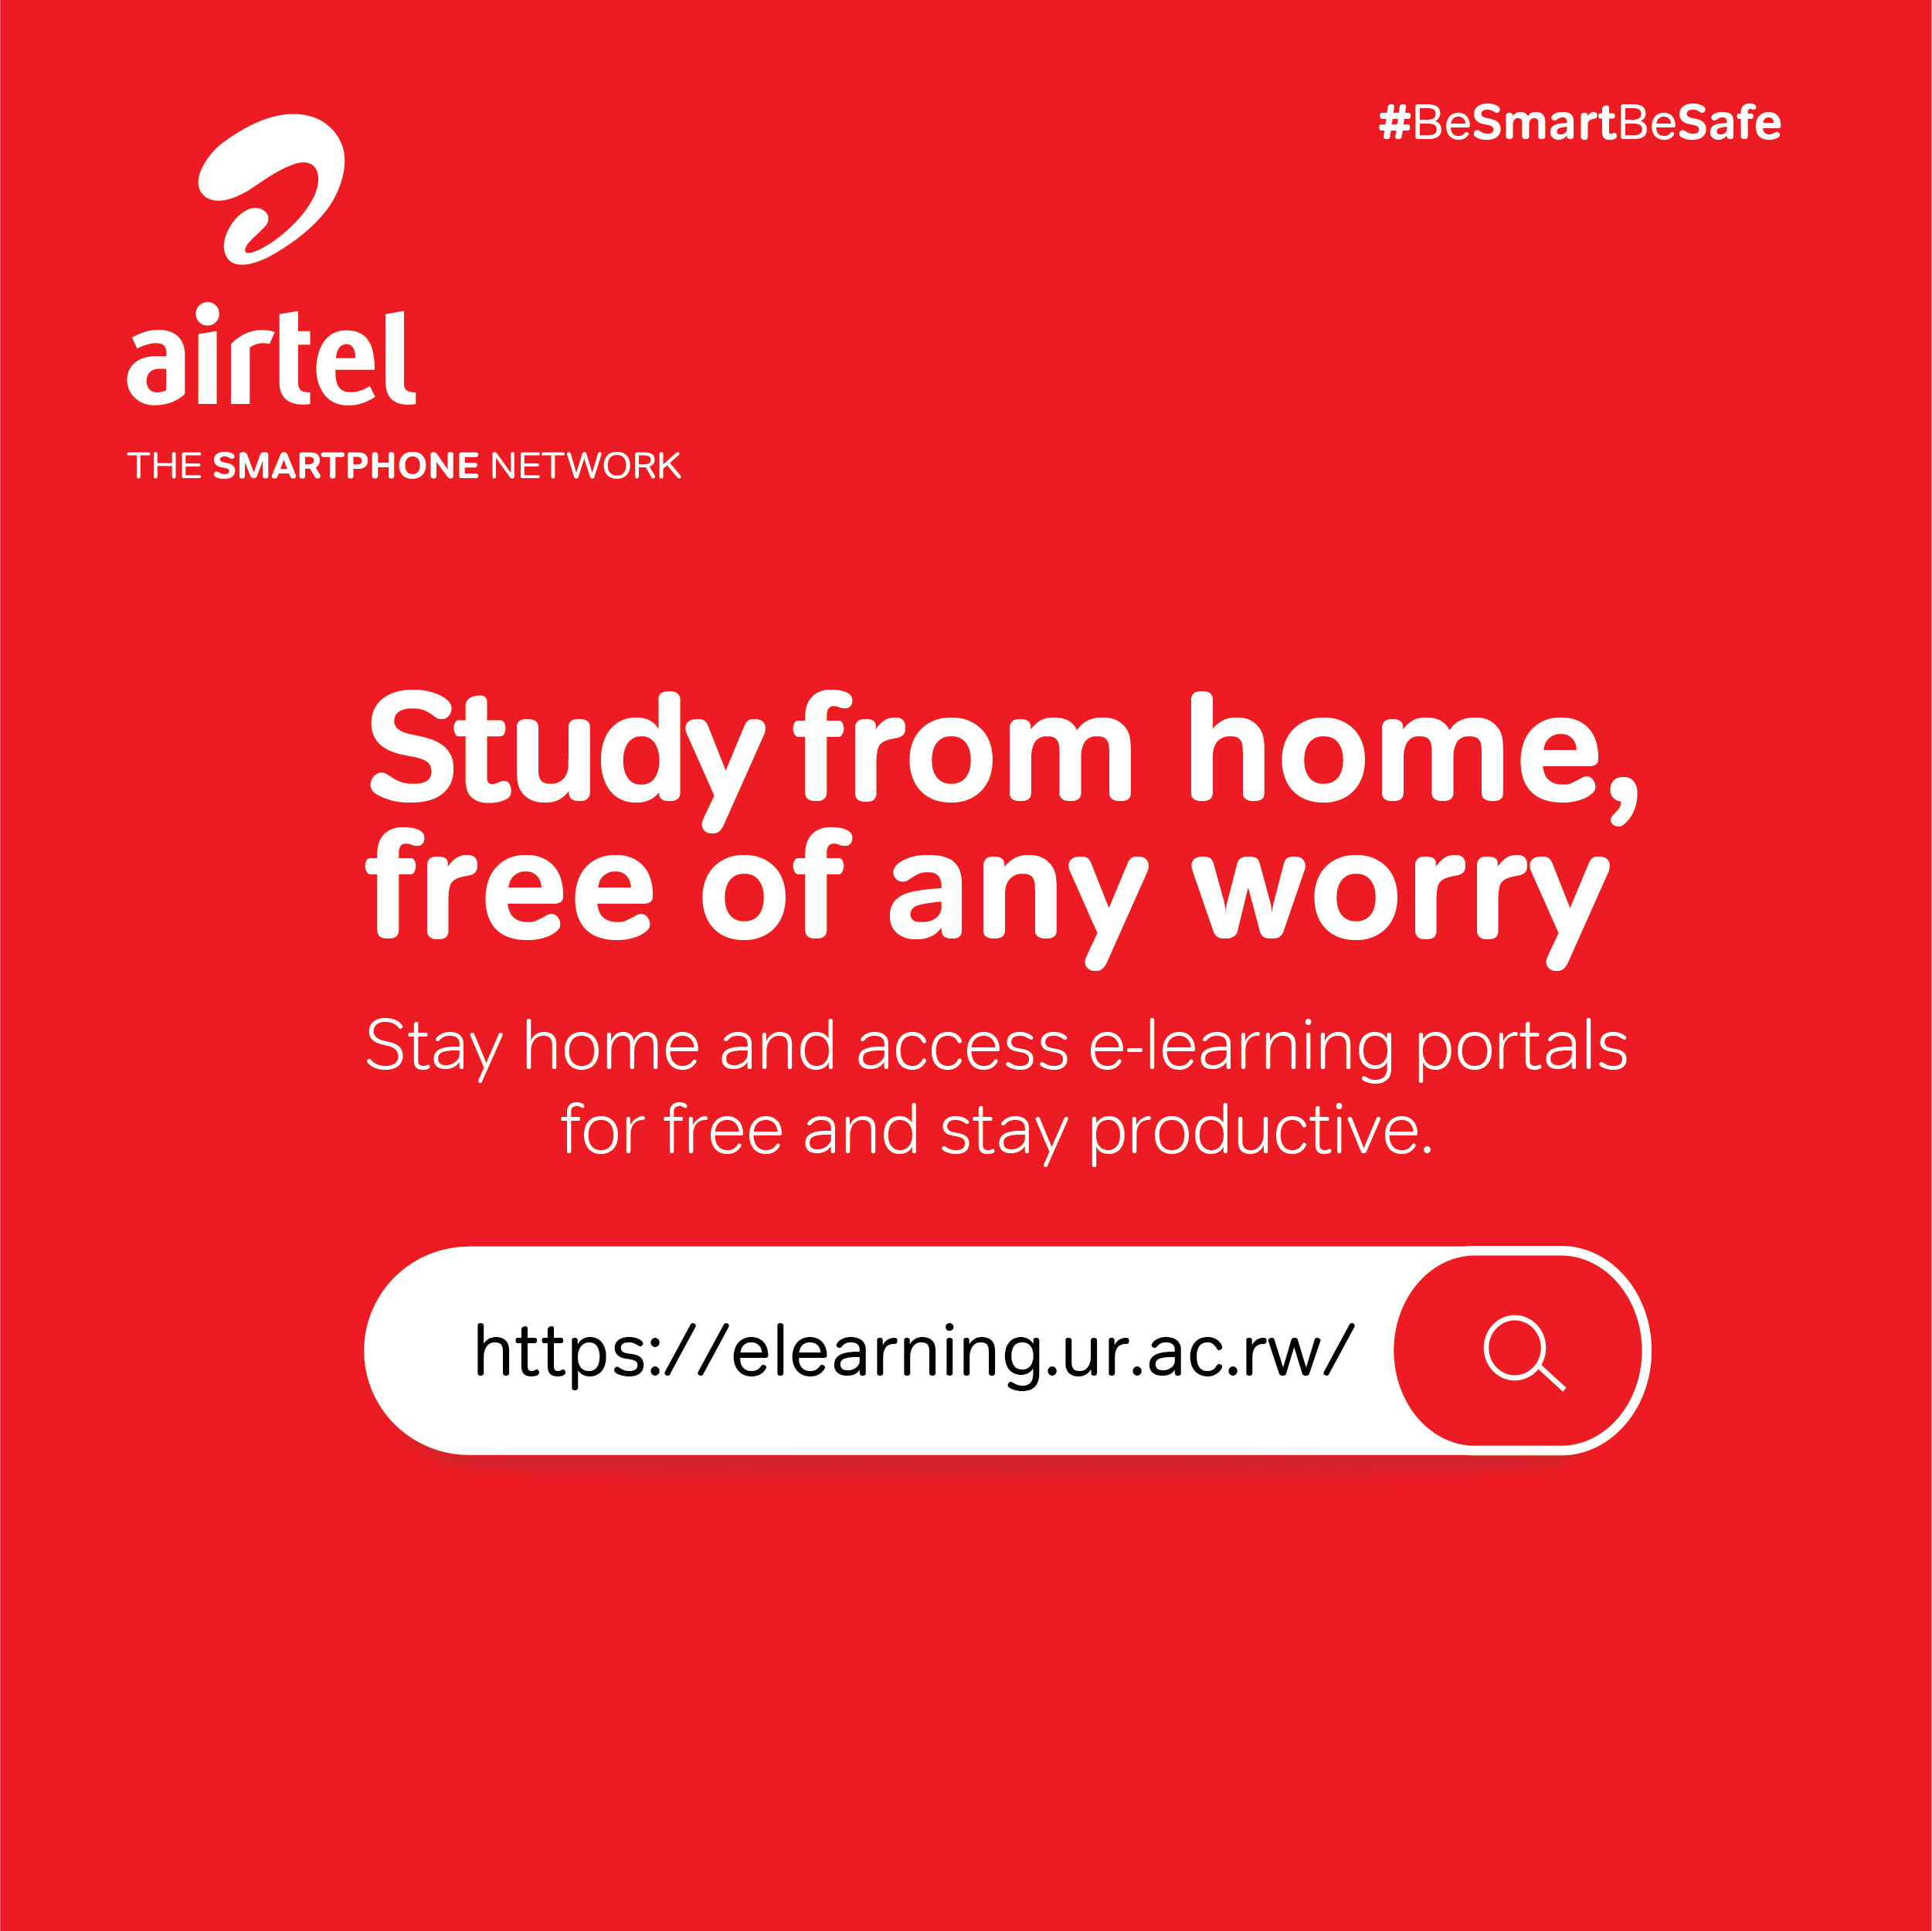 Airtel Rwanda on Twitter: "In partnership with @RwandaICT &amp; @Rwanda_Edu, AirtelRwanda has availed free access to some of the e-learning portals to help to more productive studying remotely on these